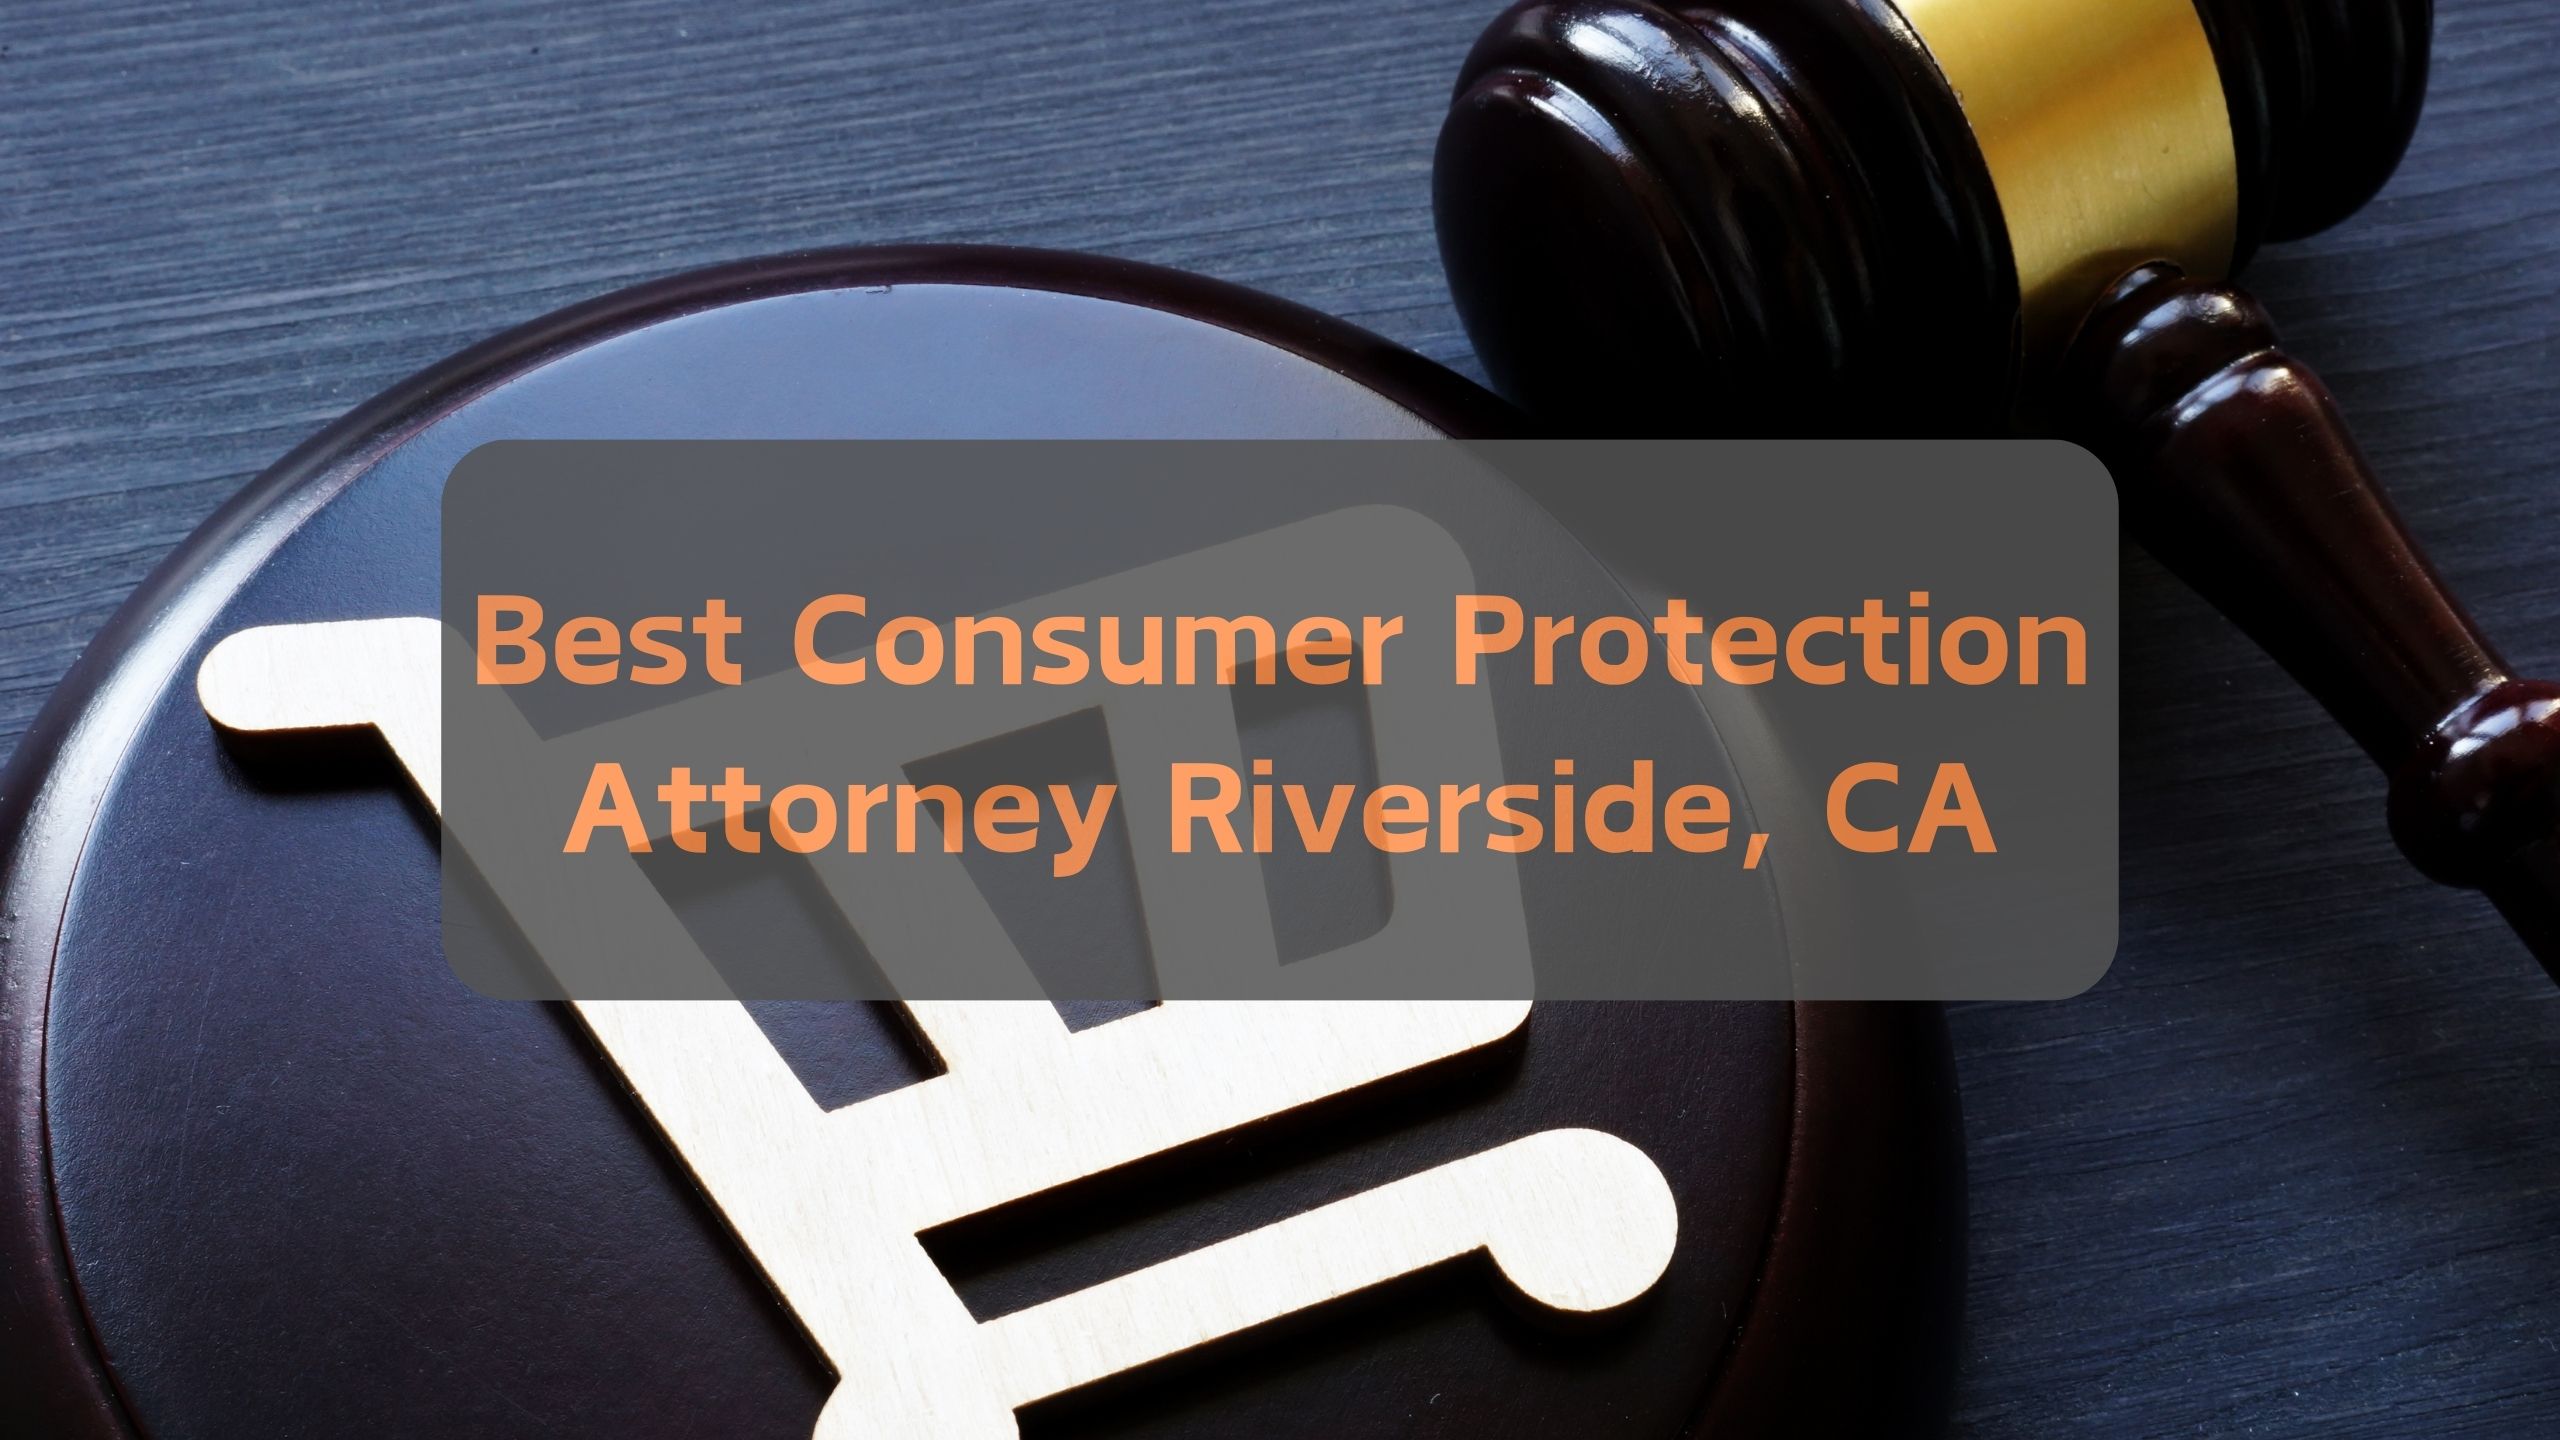 Best Consumer Protection Attorneys Riverside